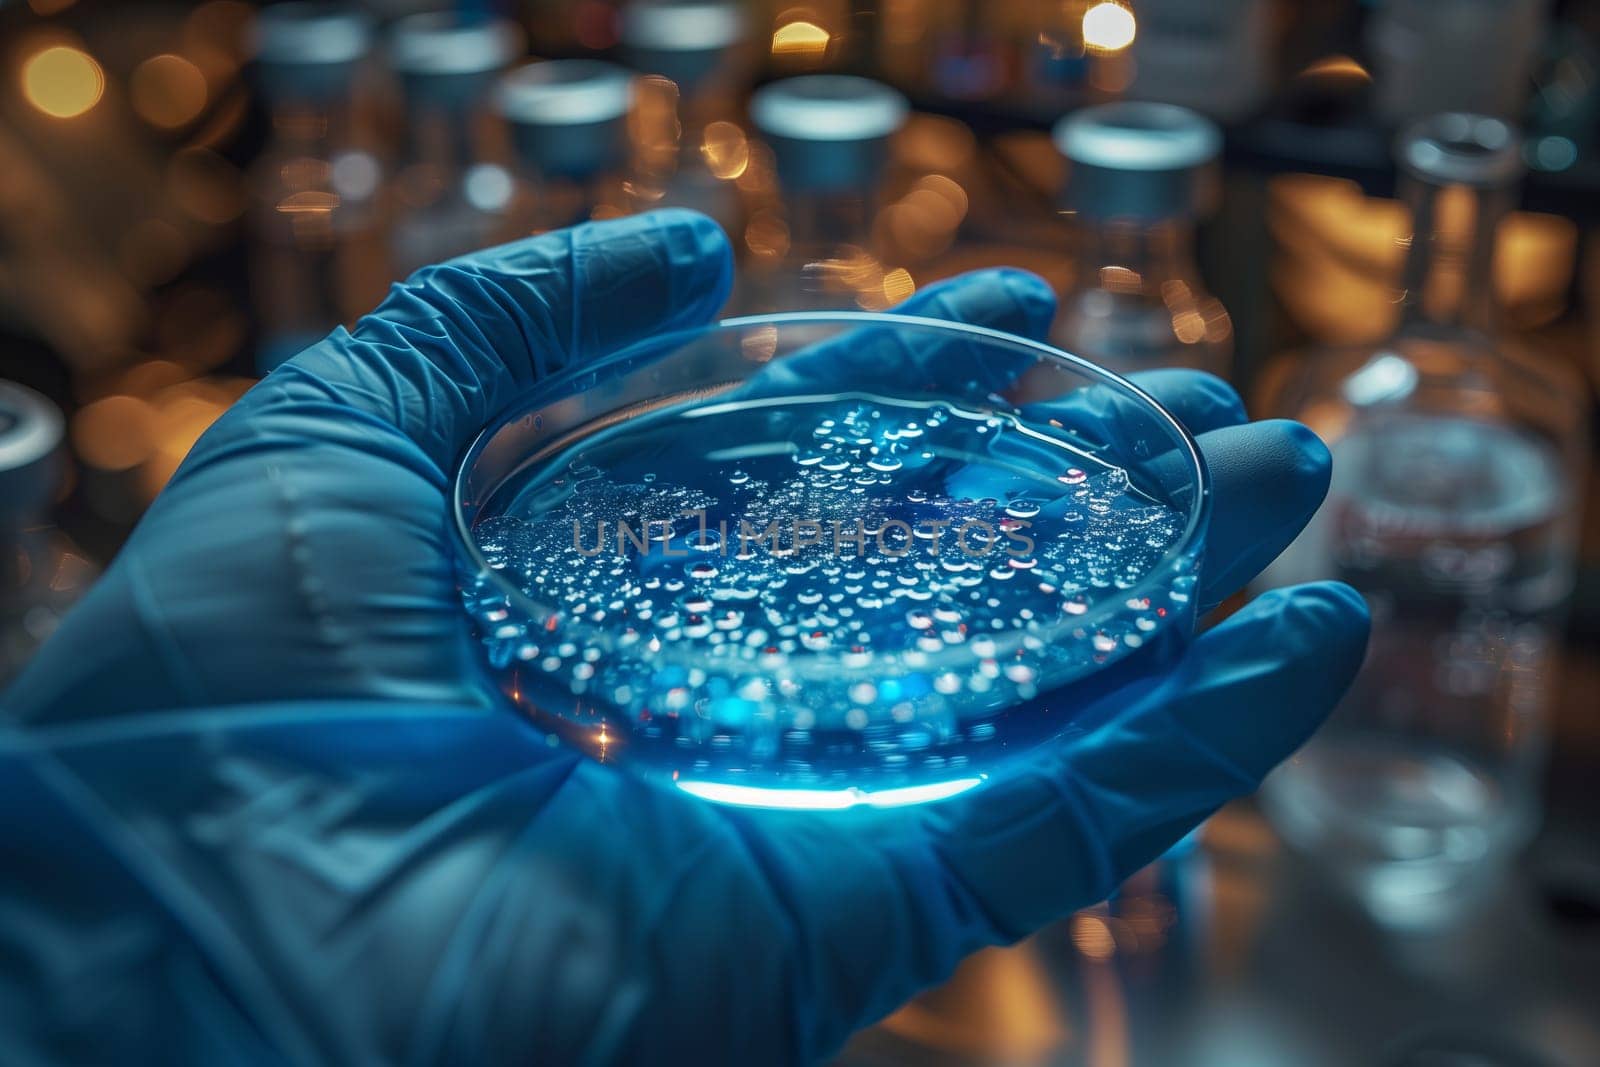 A person wearing electric blue gloves is holding a petri dish filled with water, resembling marine biology research. The blue liquid inside has a mesmerizing underwater pattern